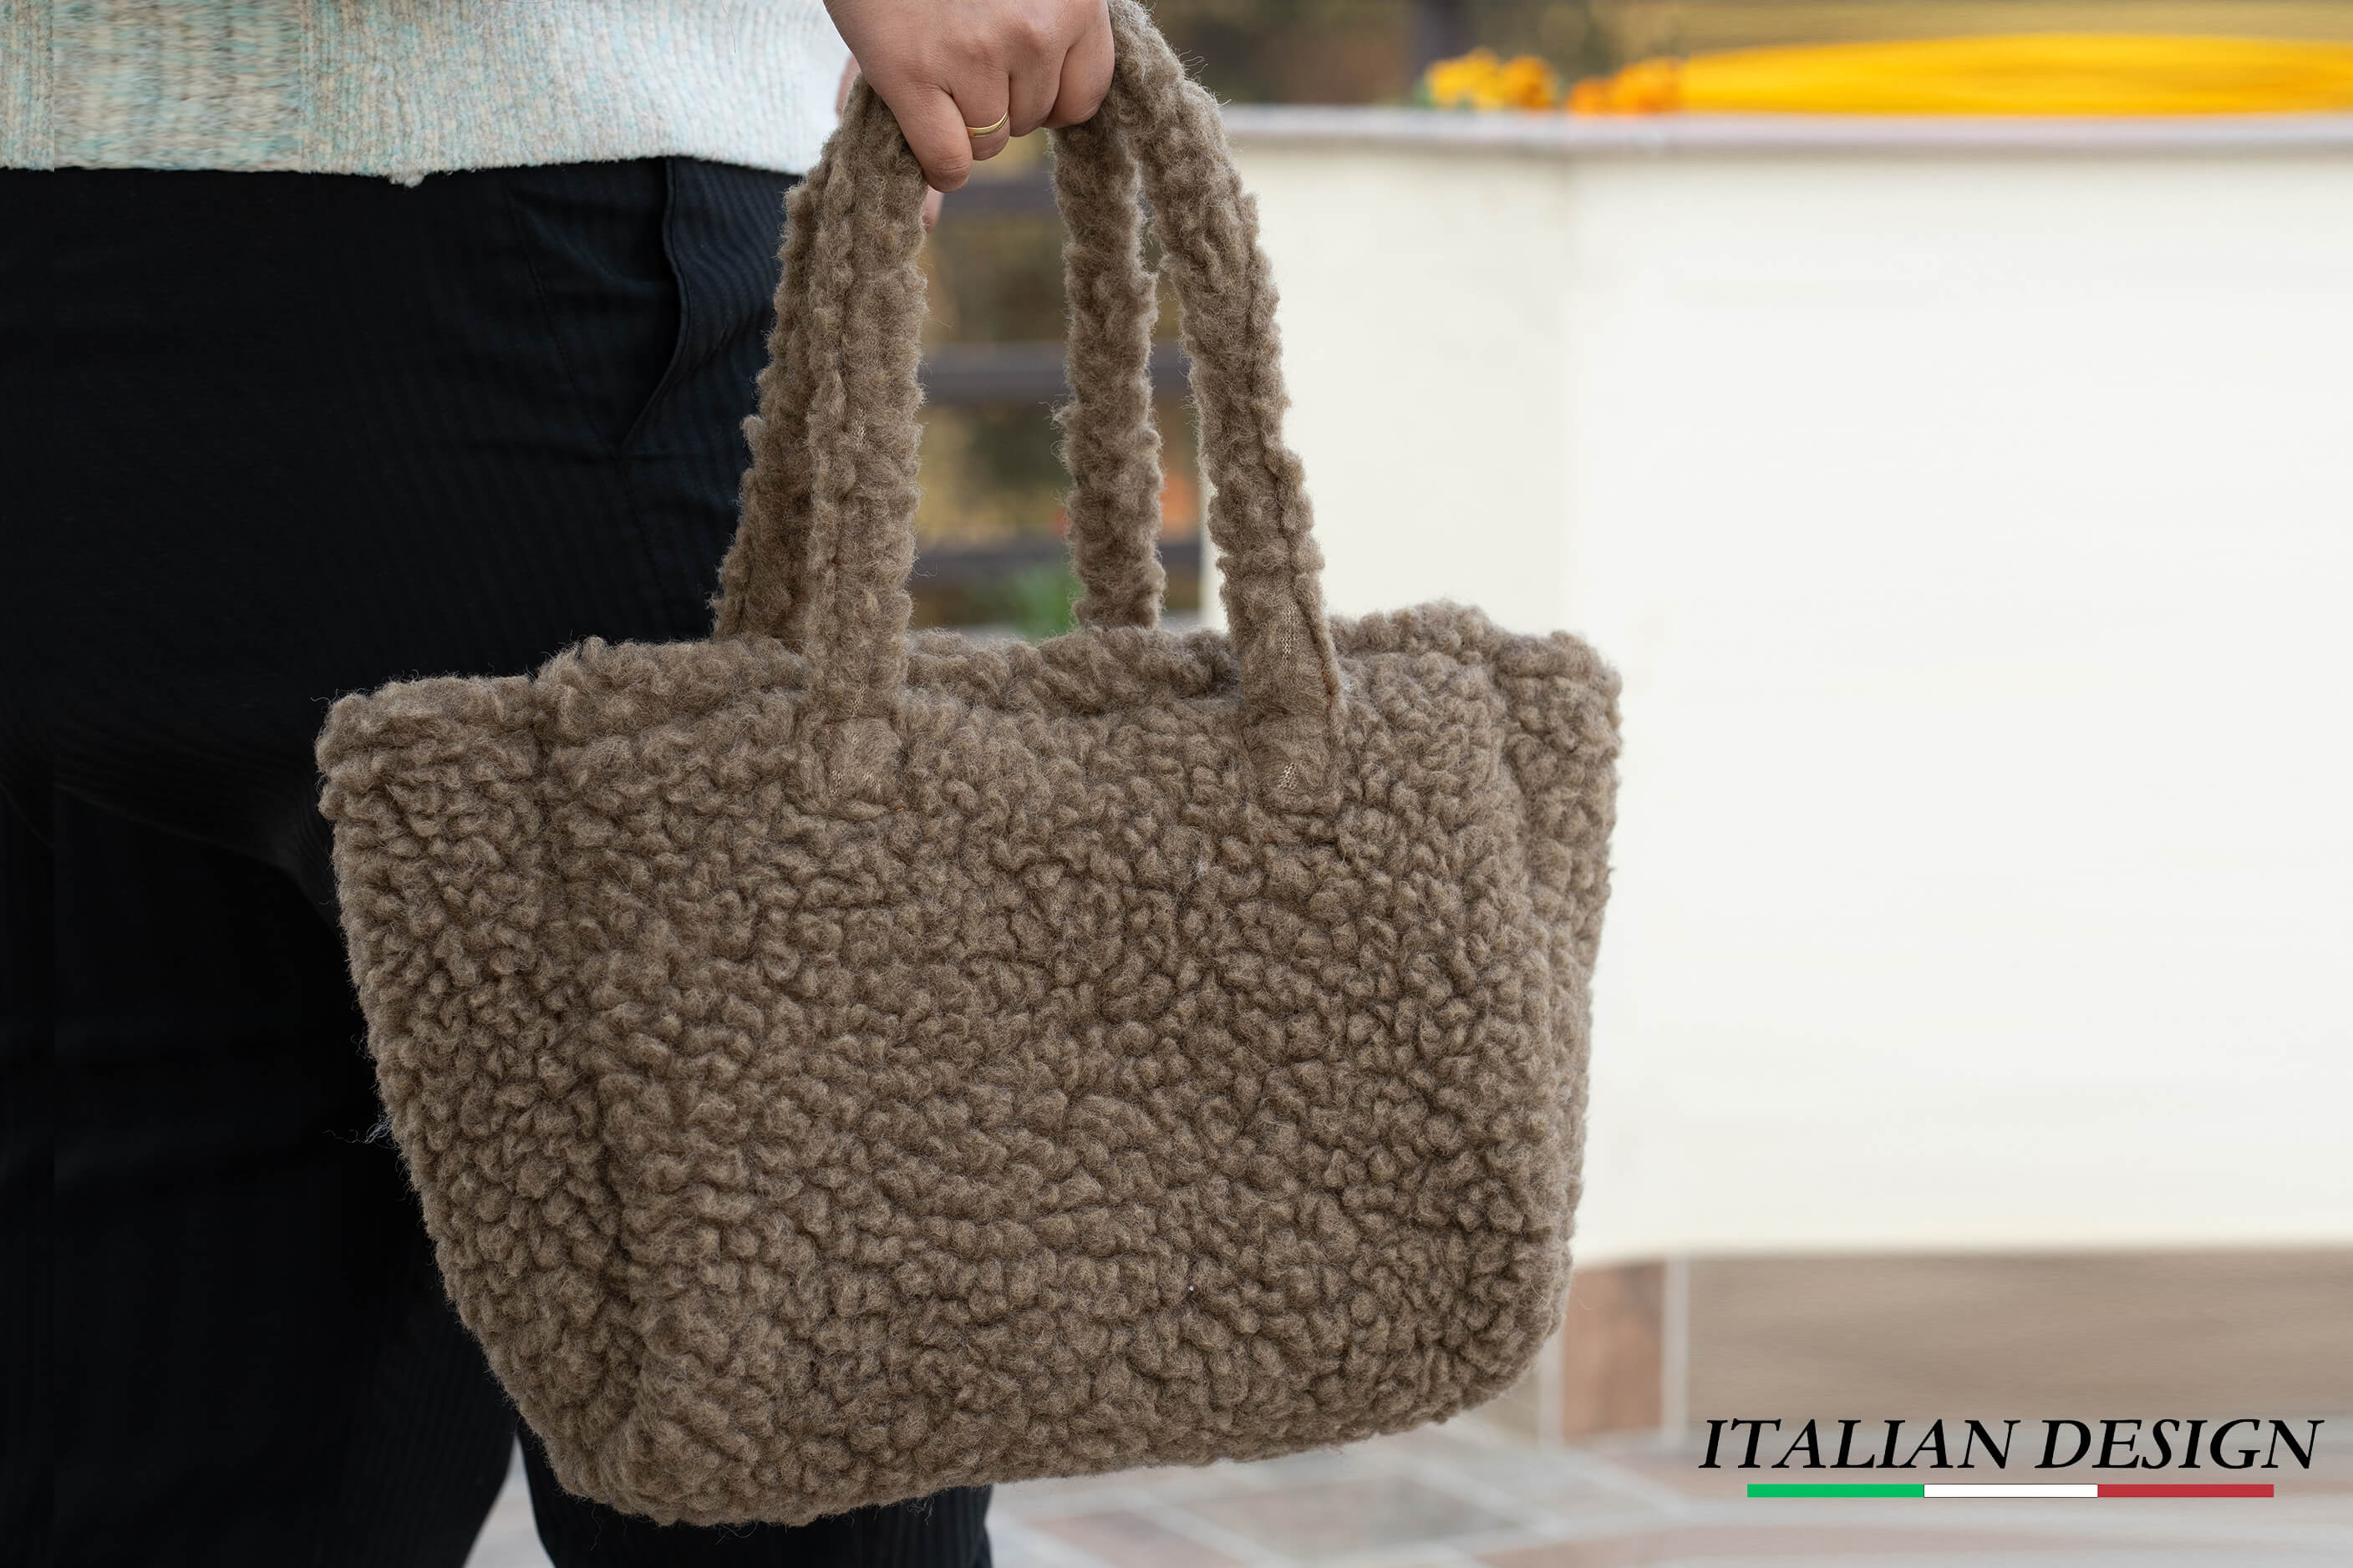 Woollen Bags vs. Natural Leather Bags